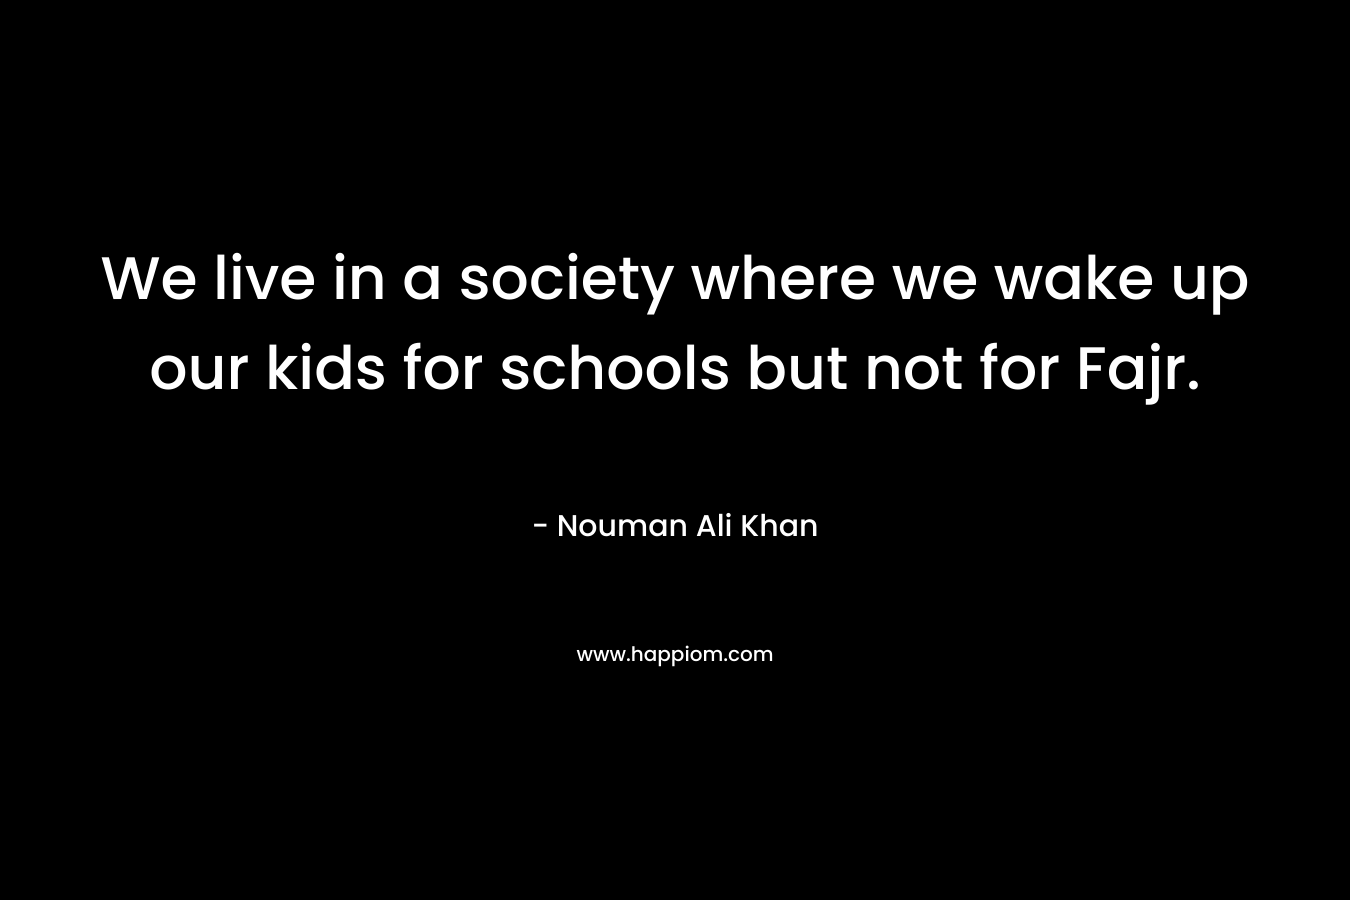 We live in a society where we wake up our kids for schools but not for Fajr.